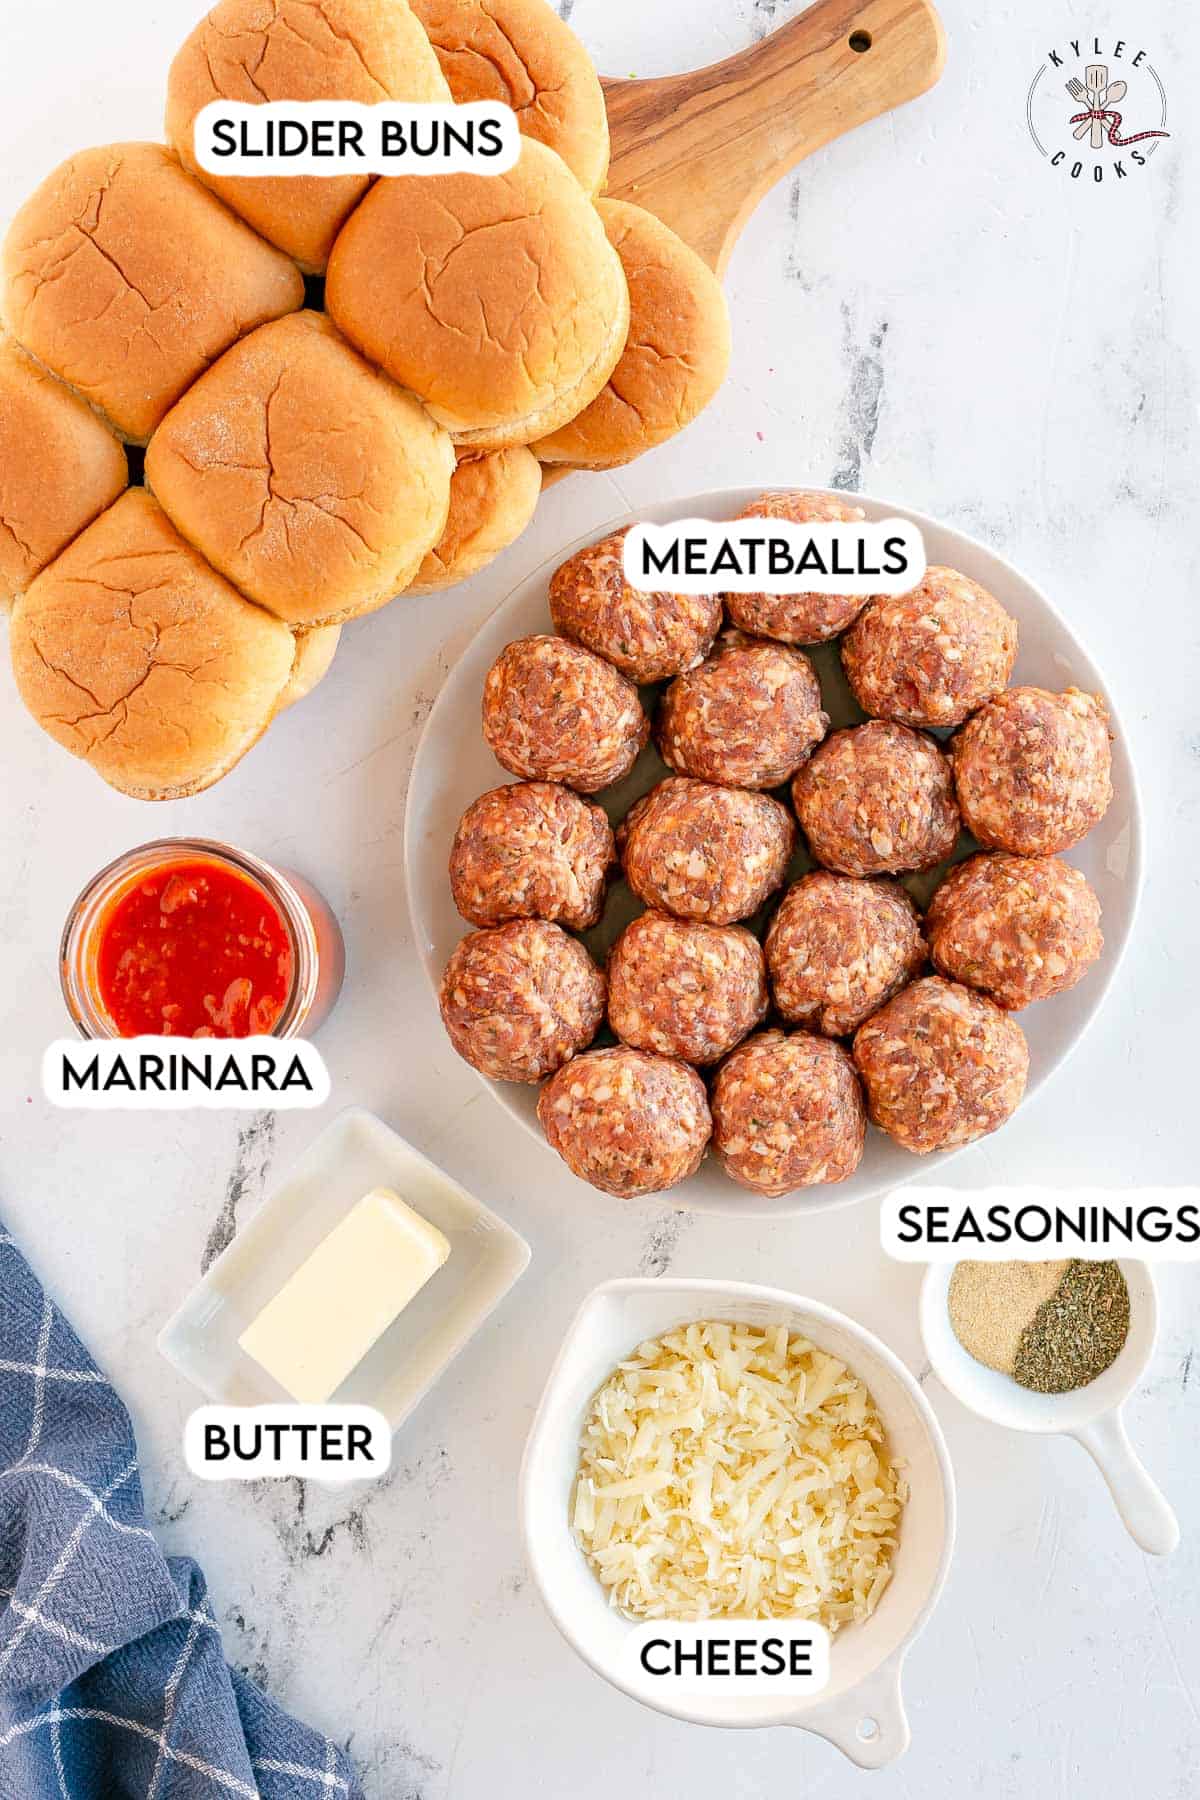 ingredients to make meatball sliders laid out and labeled.